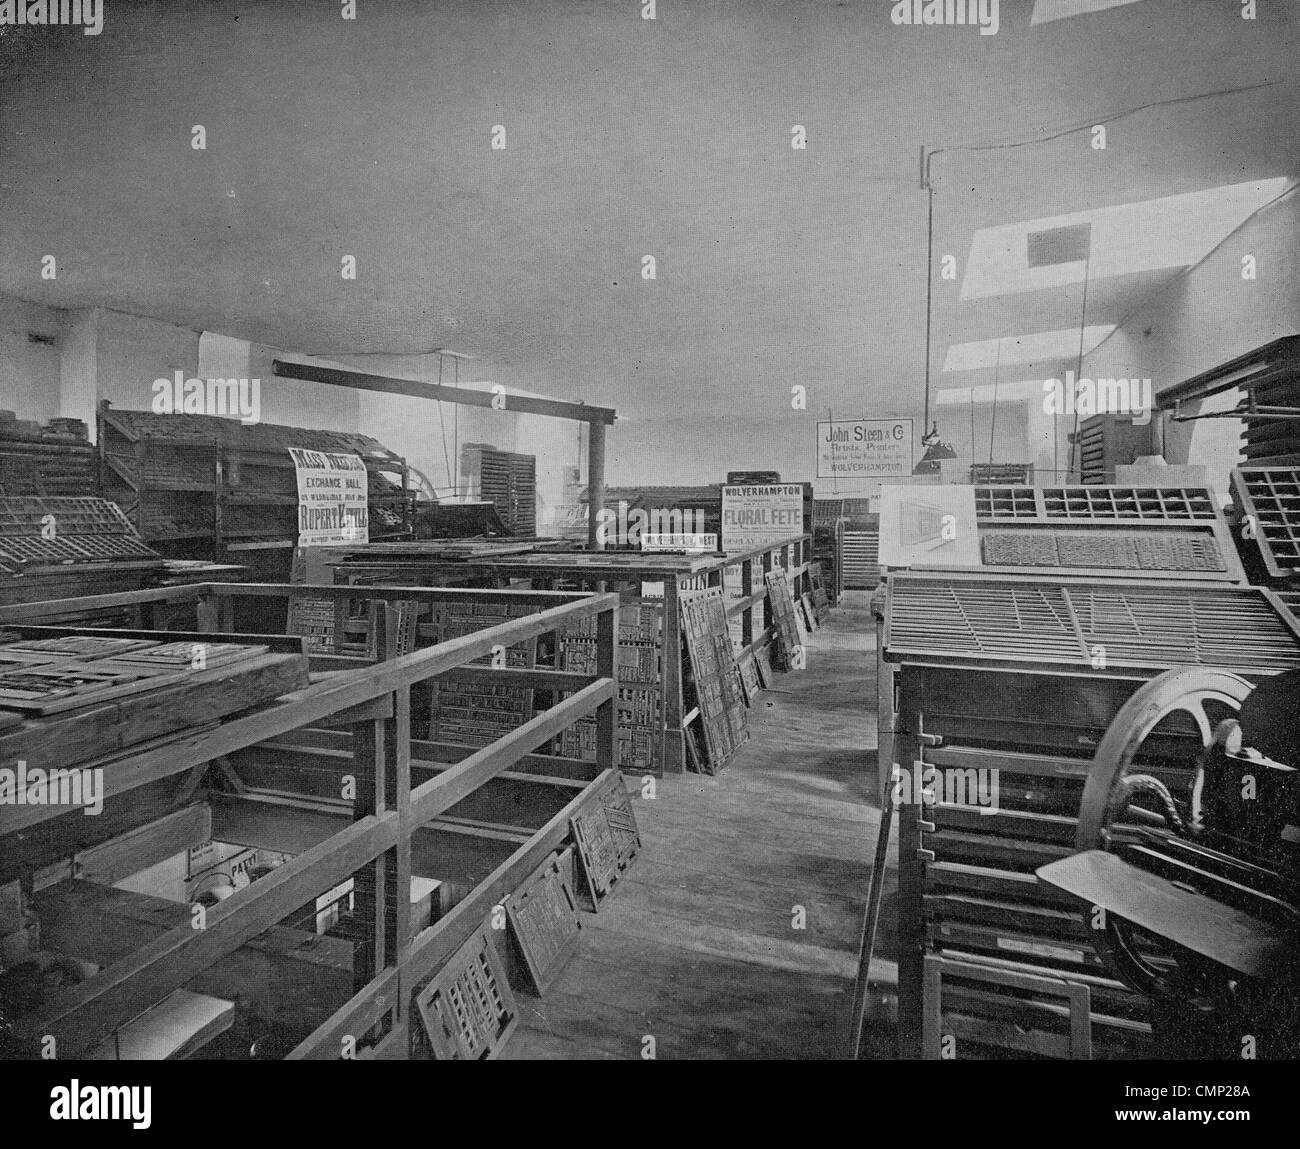 Composing Room, John Steen & Company, Wolverhampton, late 20th cent. A photograph taken in 1896, of the Composing Room at Stock Photo